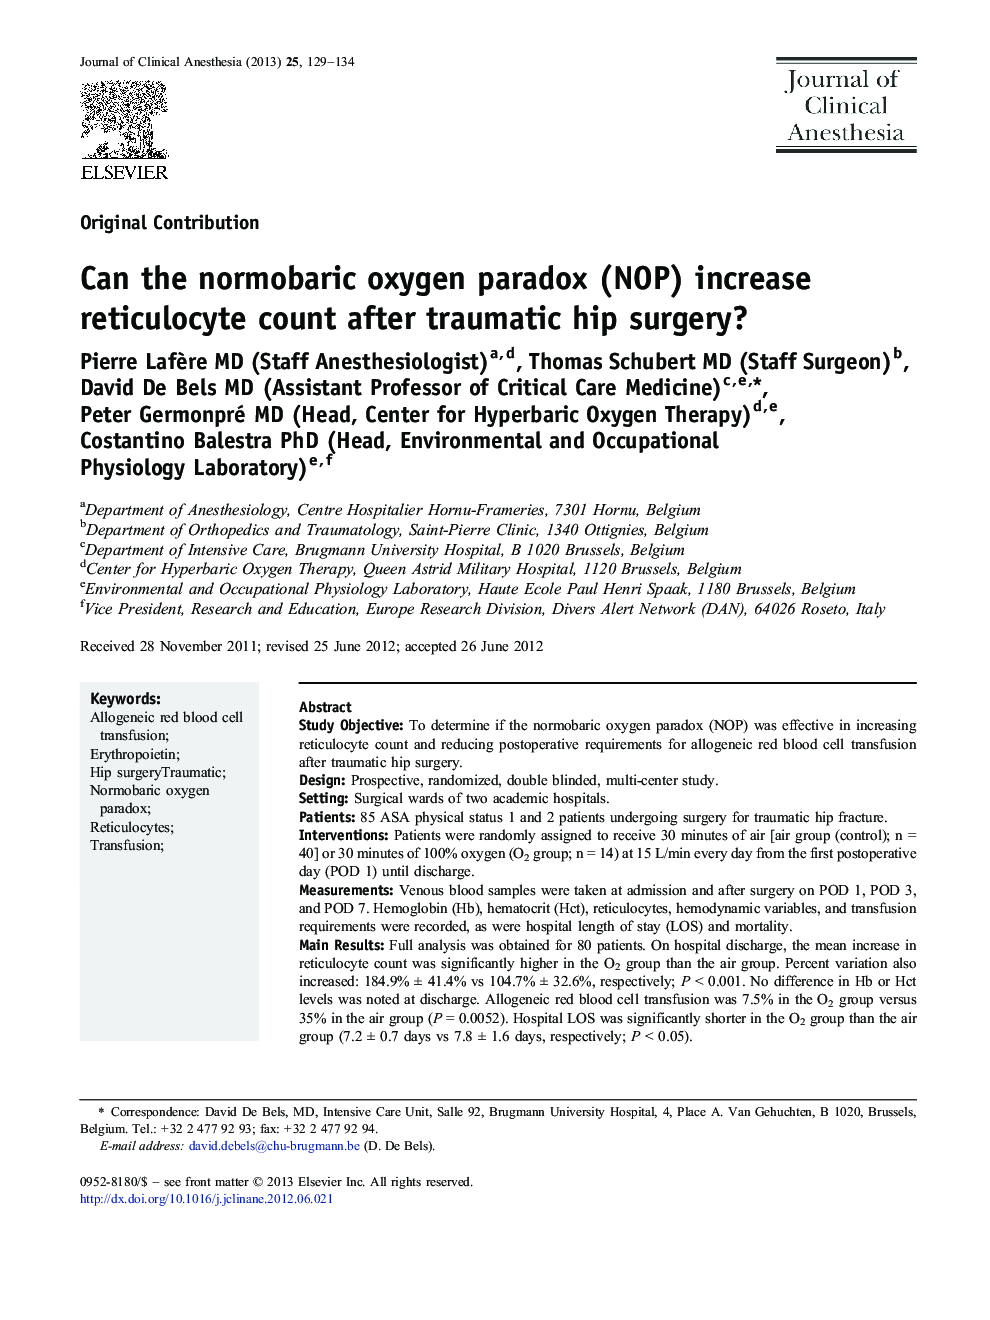 Can the normobaric oxygen paradox (NOP) increase reticulocyte count after traumatic hip surgery?